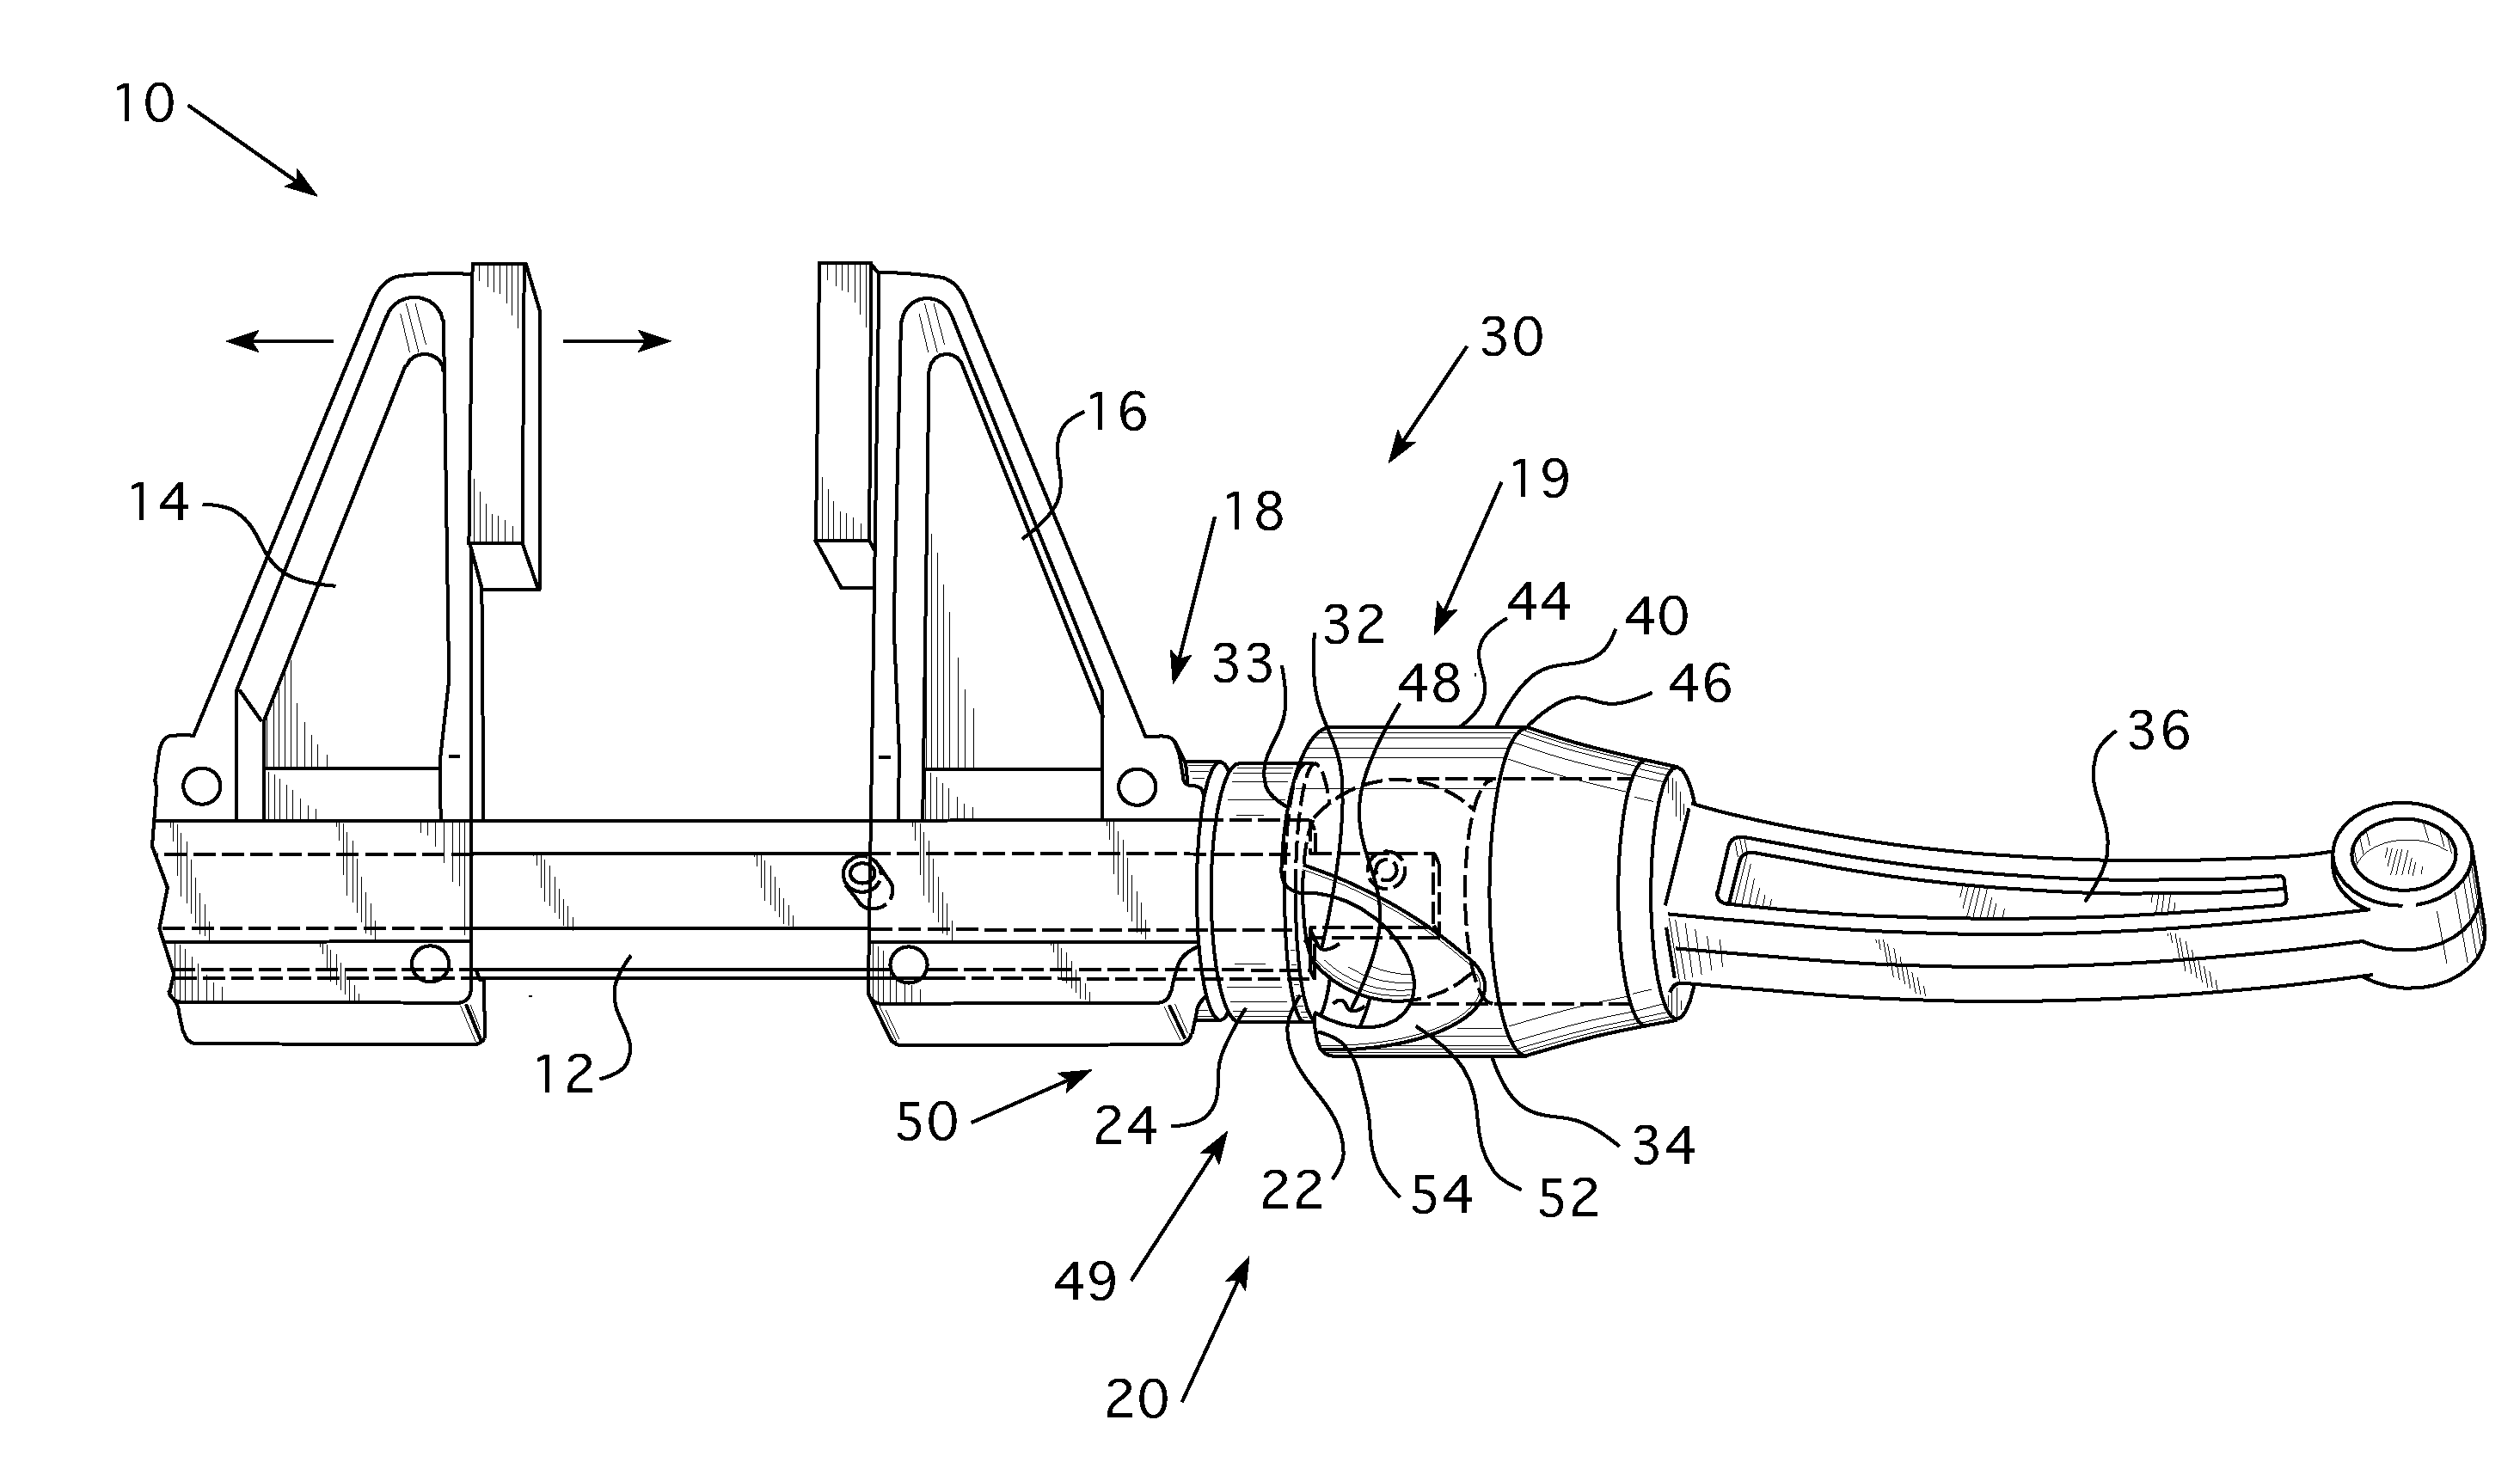 Clamp Assembly for Sliding Clamp